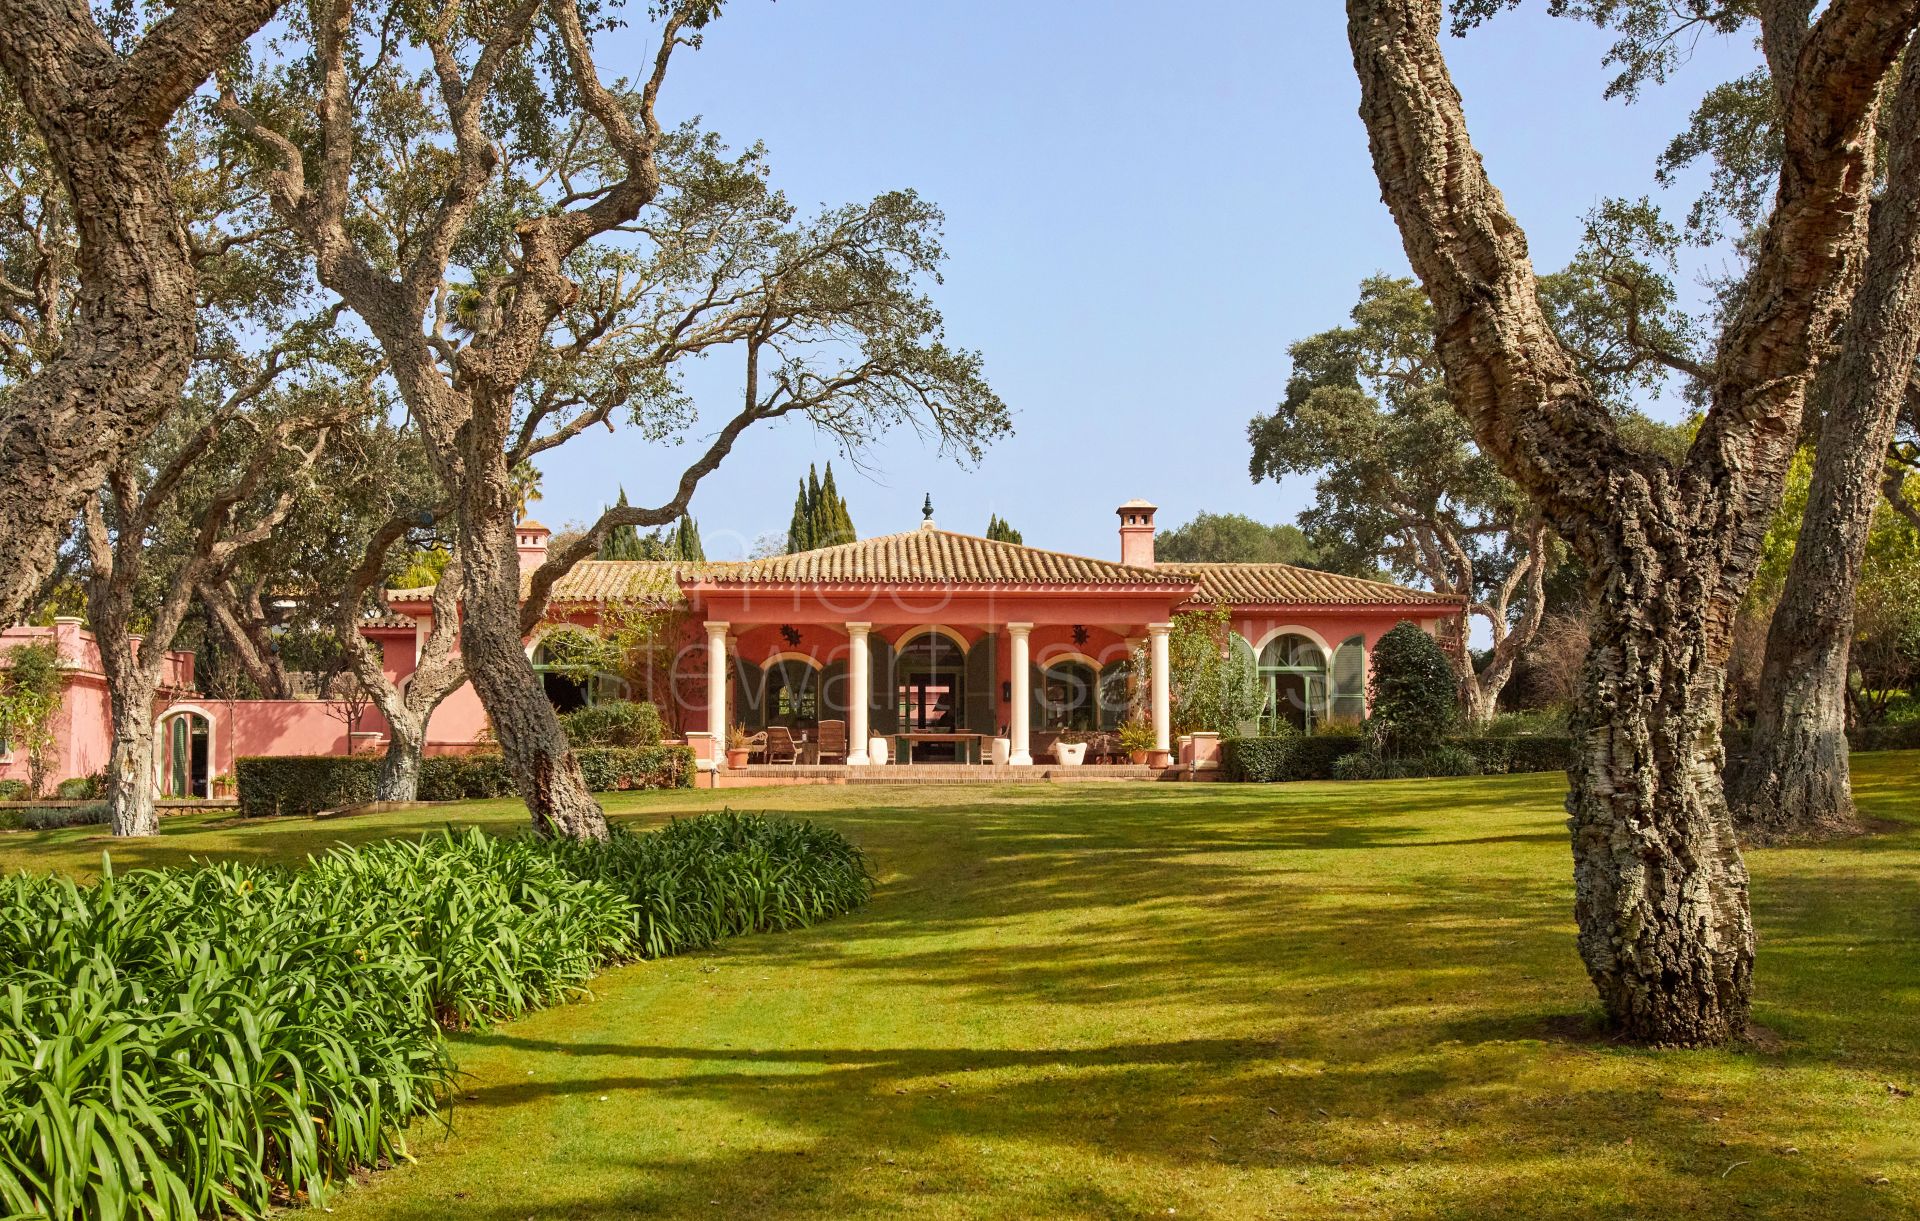 Superb one storey villa in Central Sotogrande - Andalucian architecture at its best